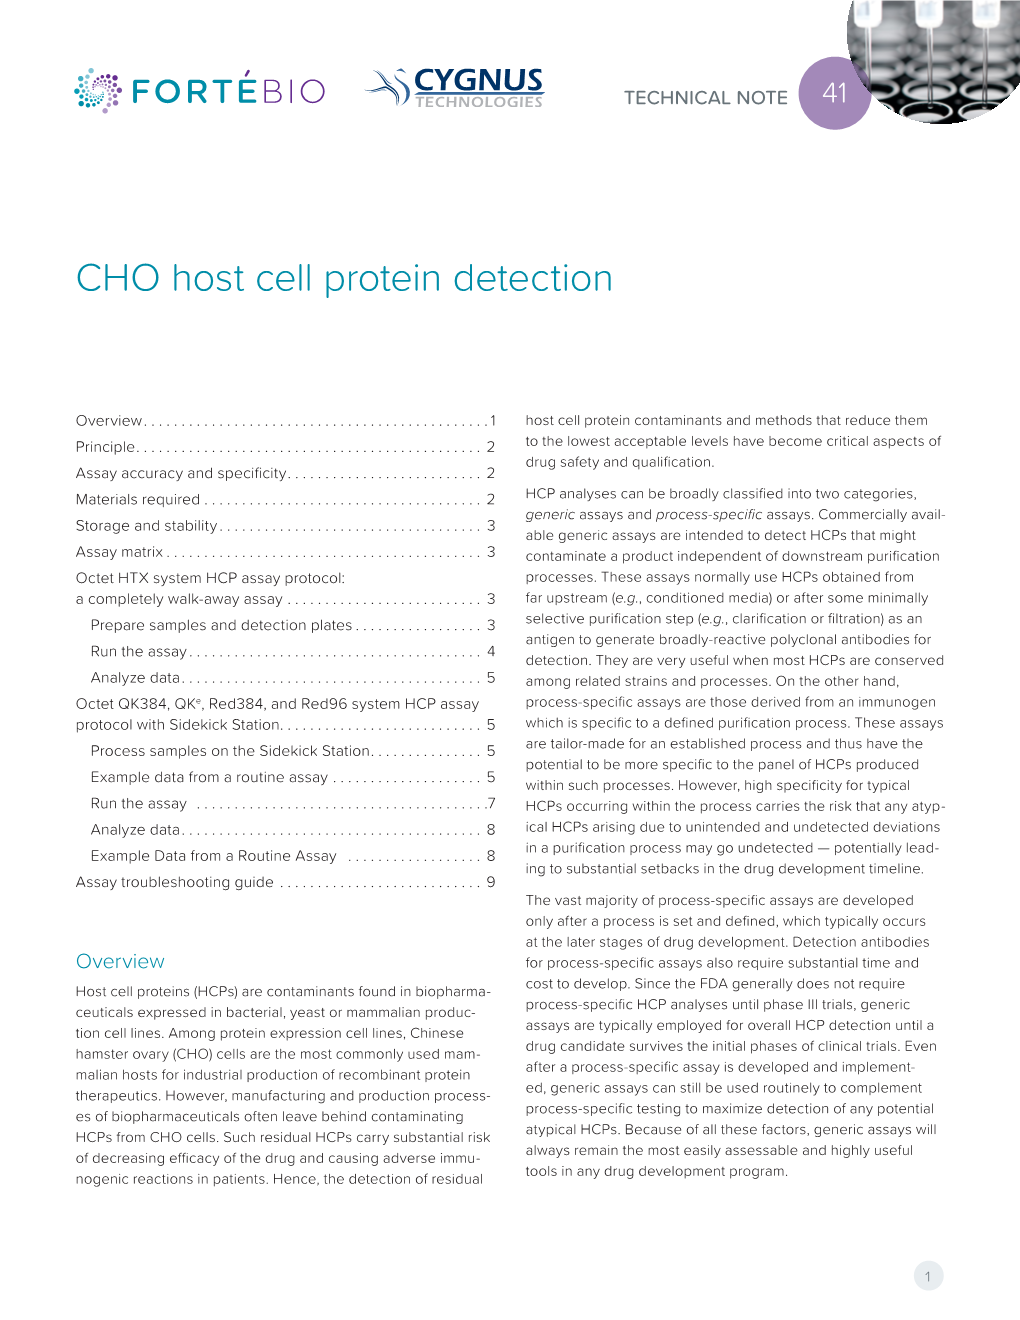 CHO Host Cell Protein Detection | Fortebio